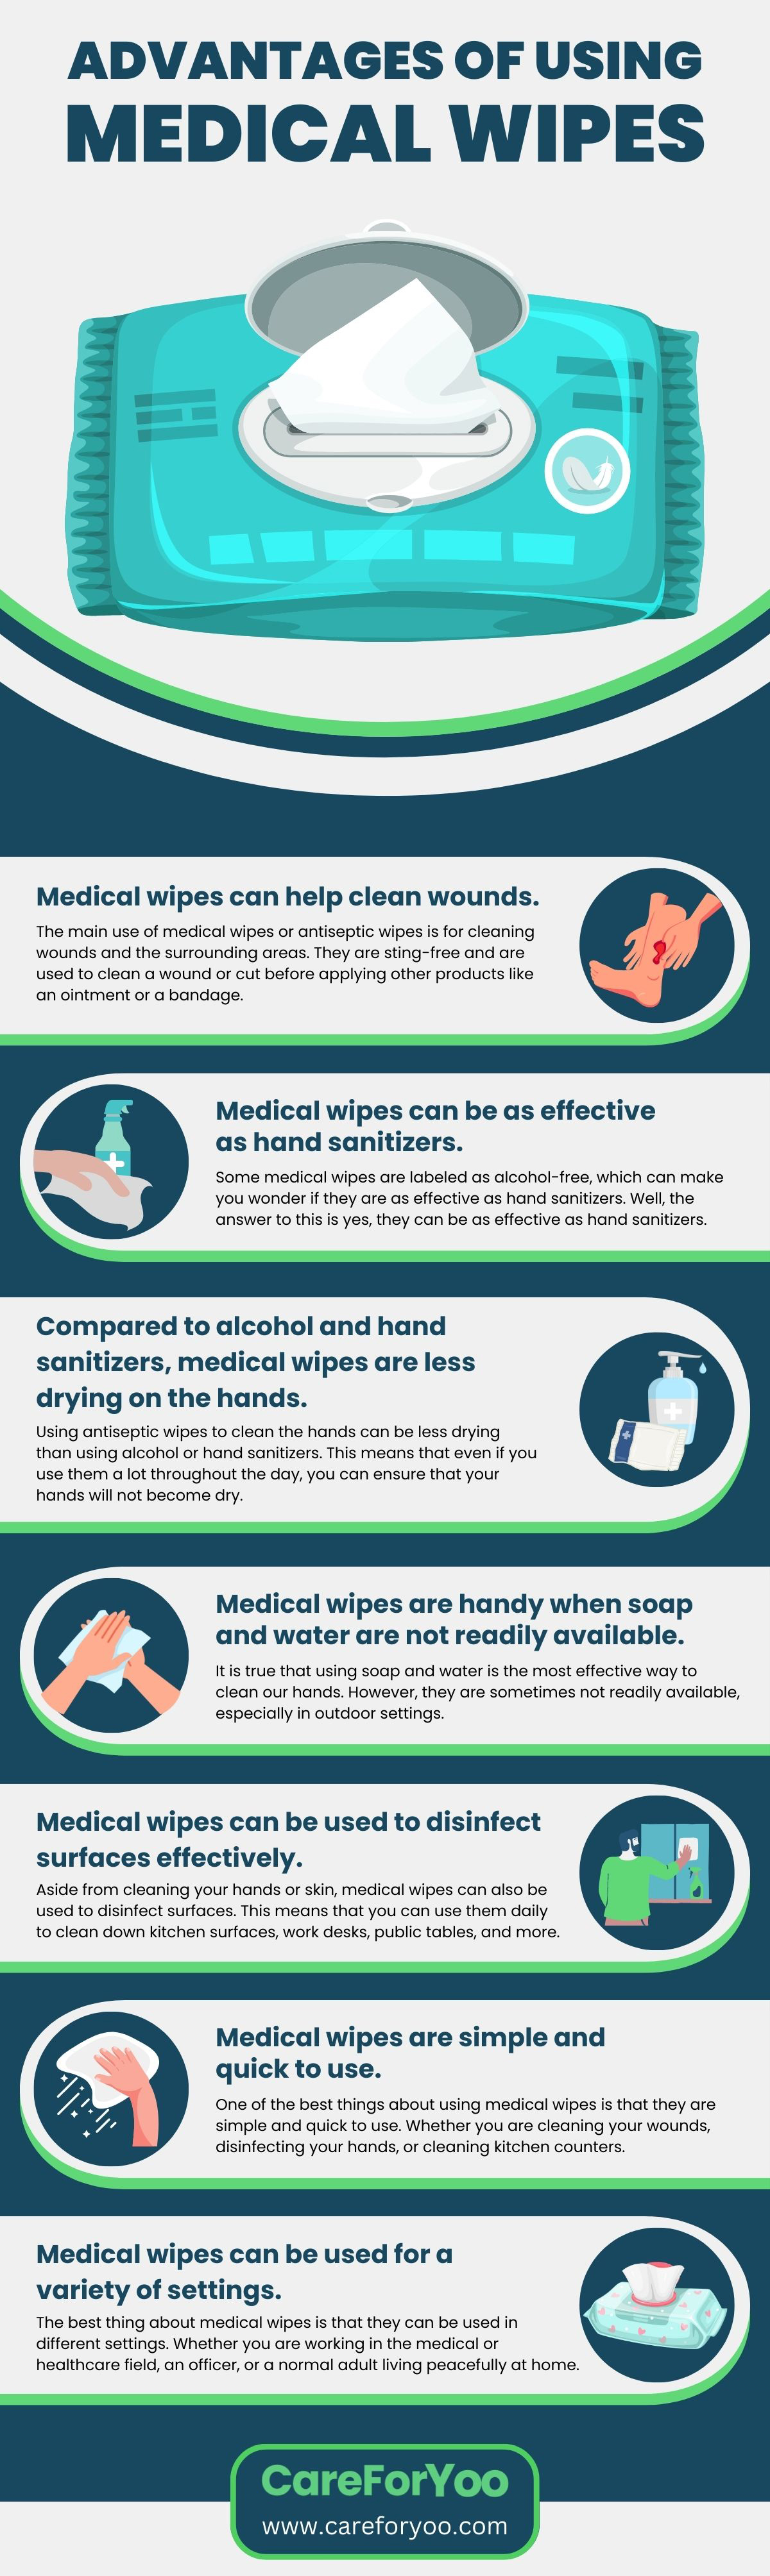 Advantages of Using Medical Wipes